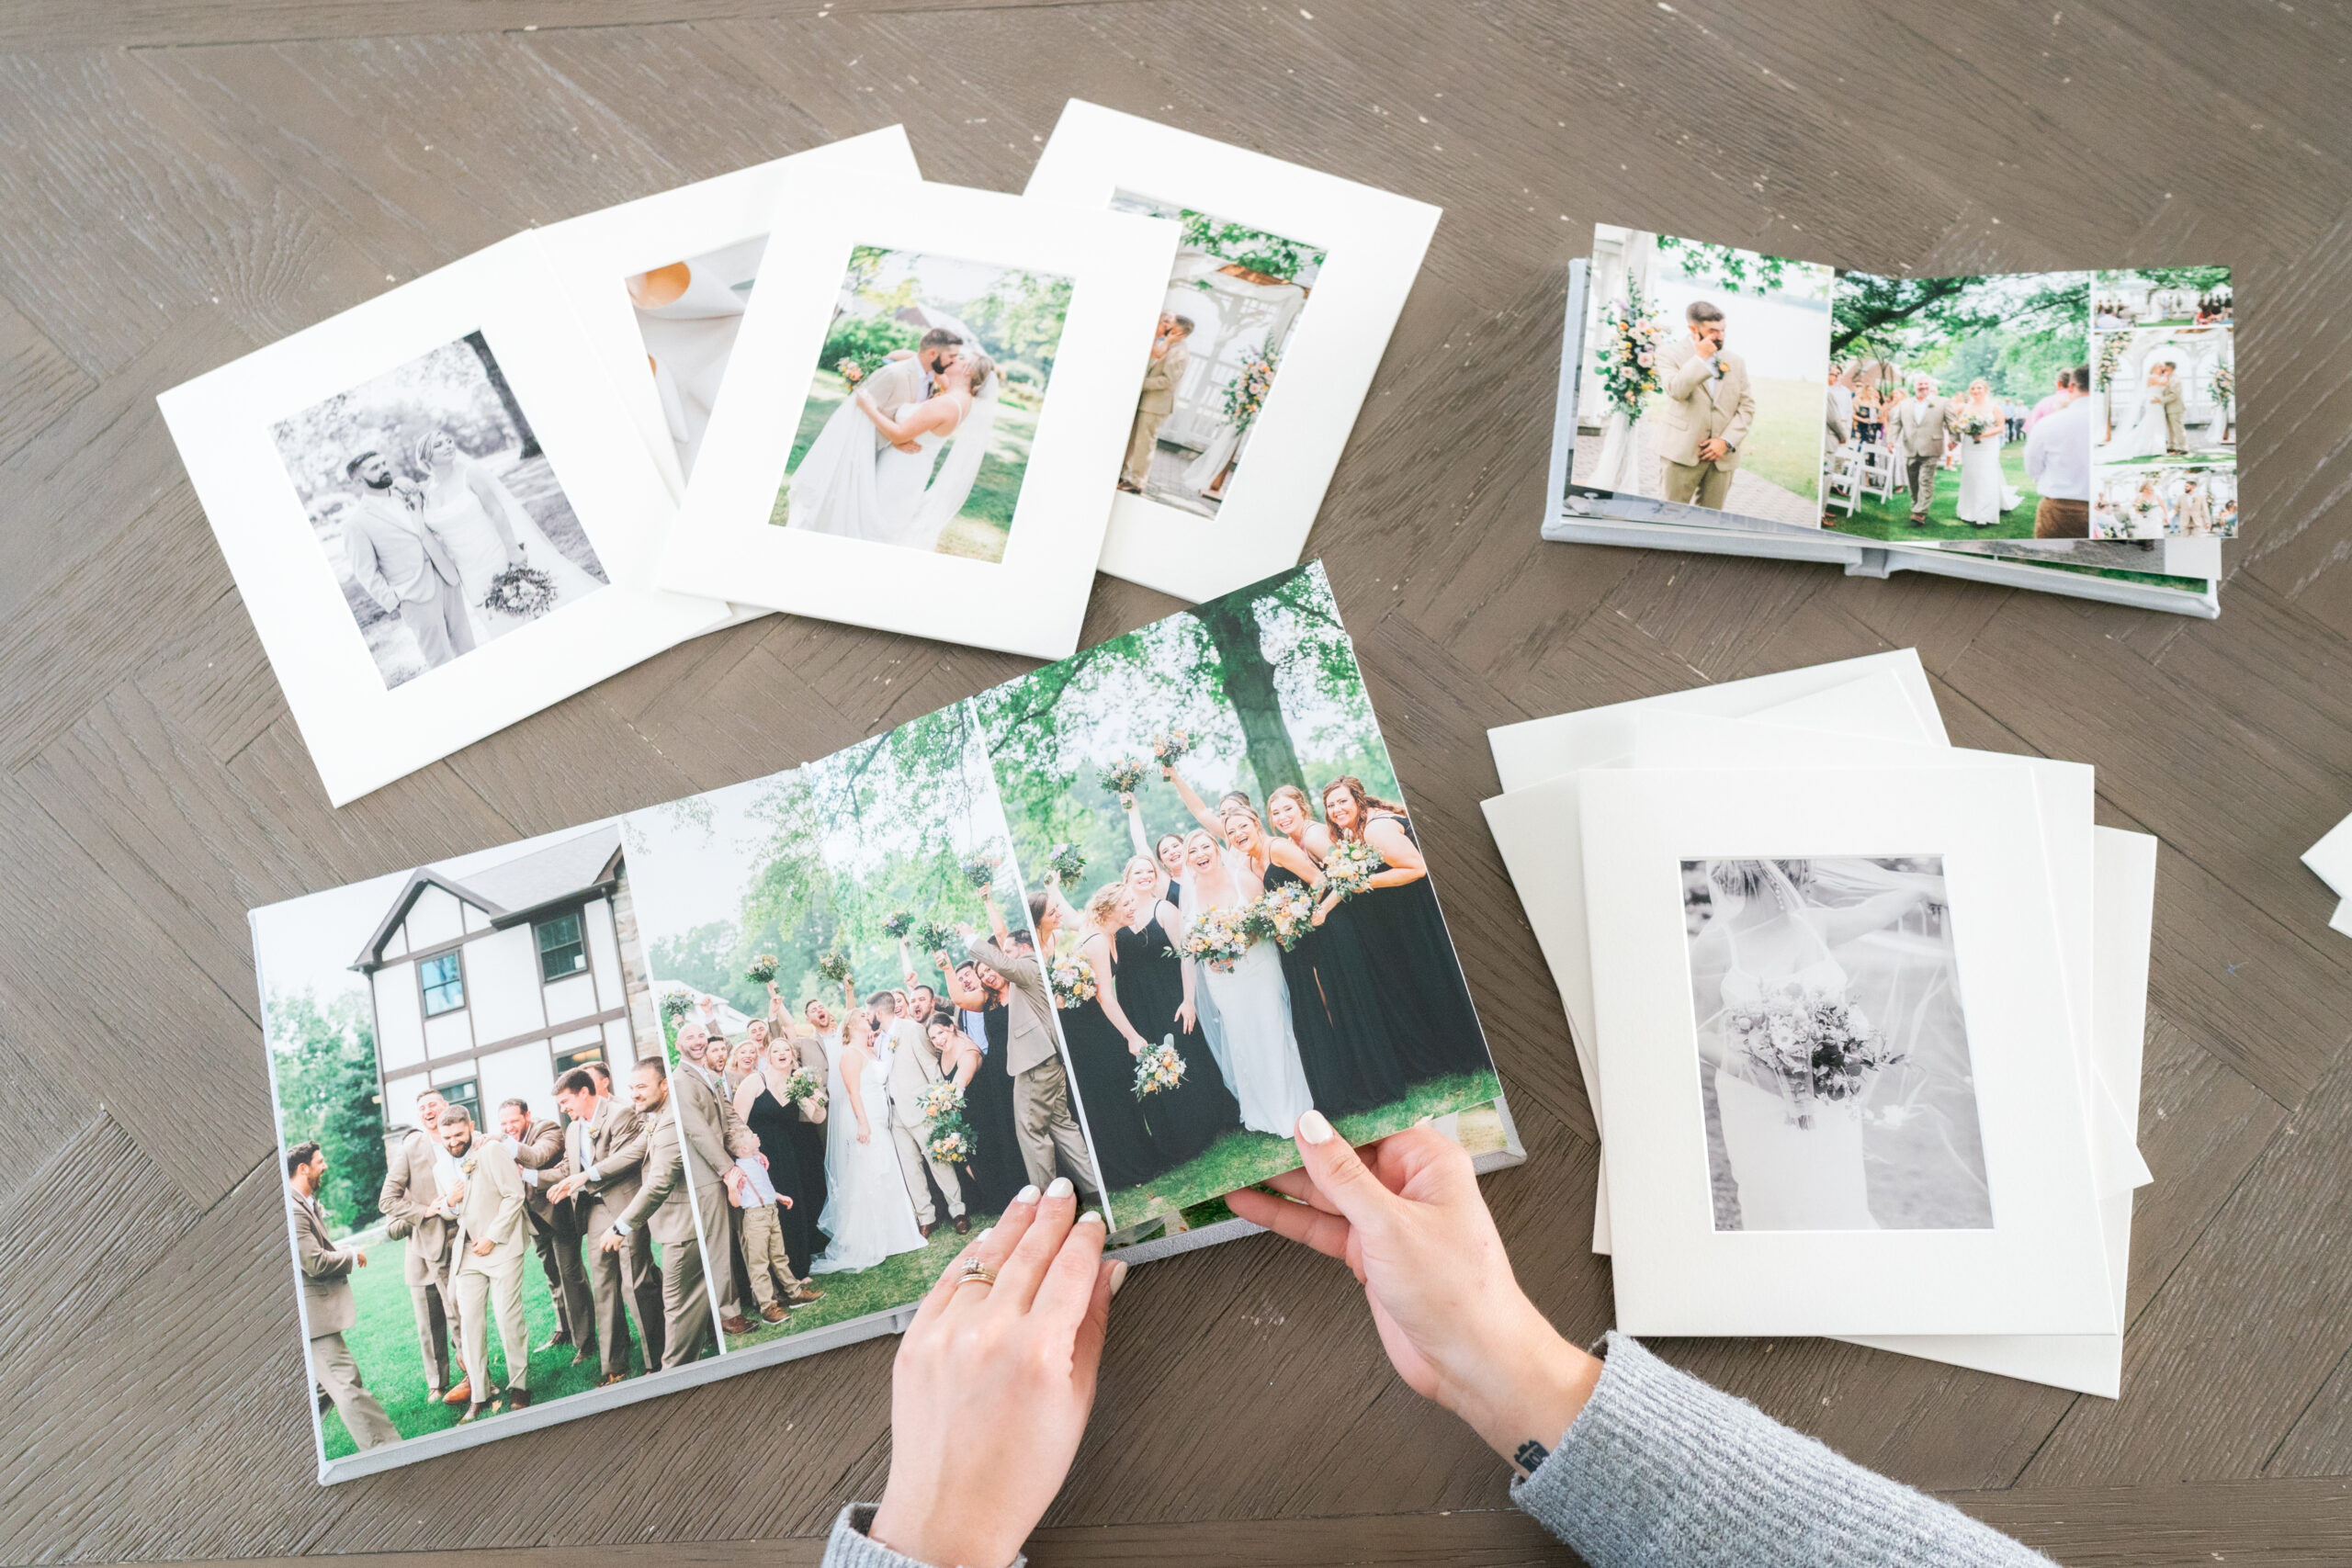 Matted Prints and Album with Heather J Photography